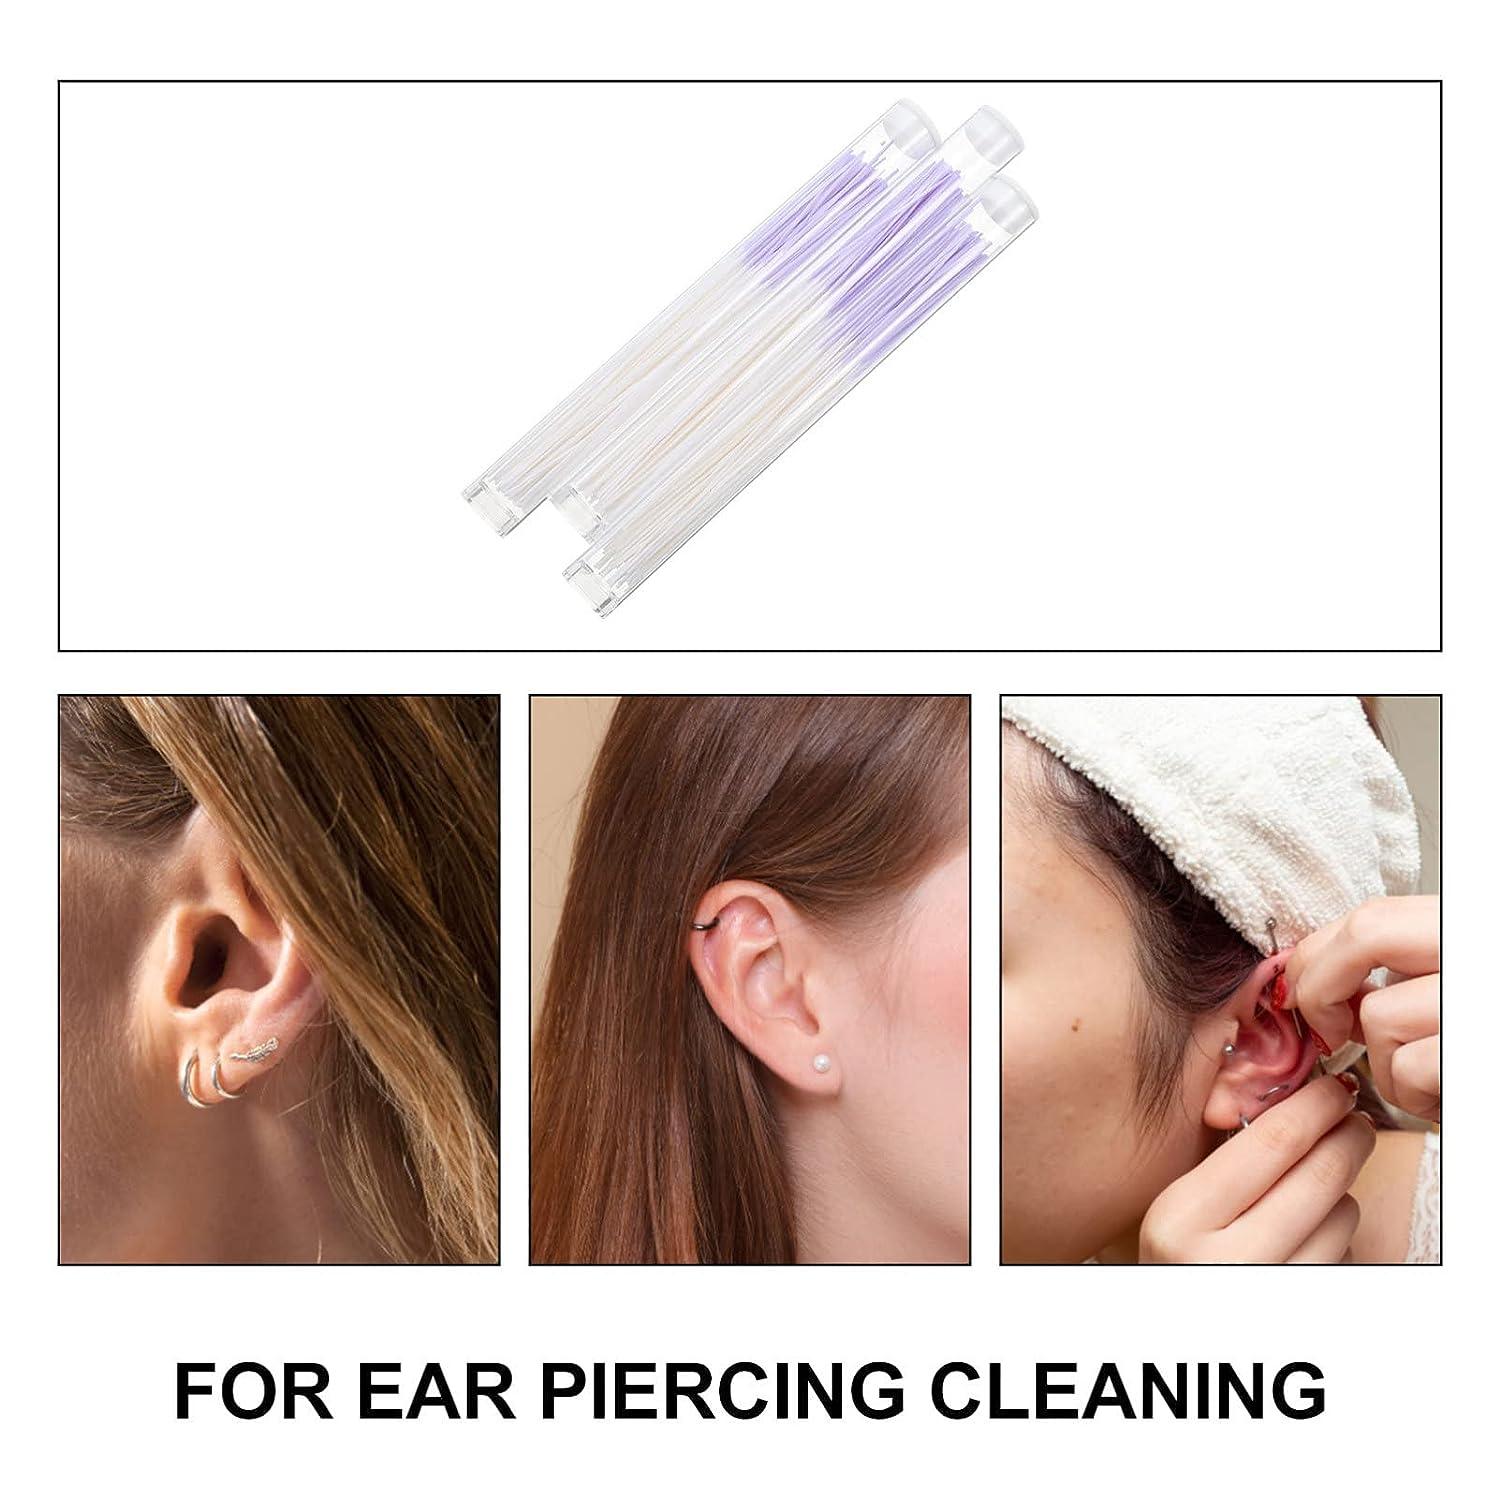 Earrings Hole Cleaner Kit, Piercing Aftercare Cleaner Earrings Piercing  Cleaning Line Ear Piercing Care Cleaning Tool for Girls Women Men, Ear